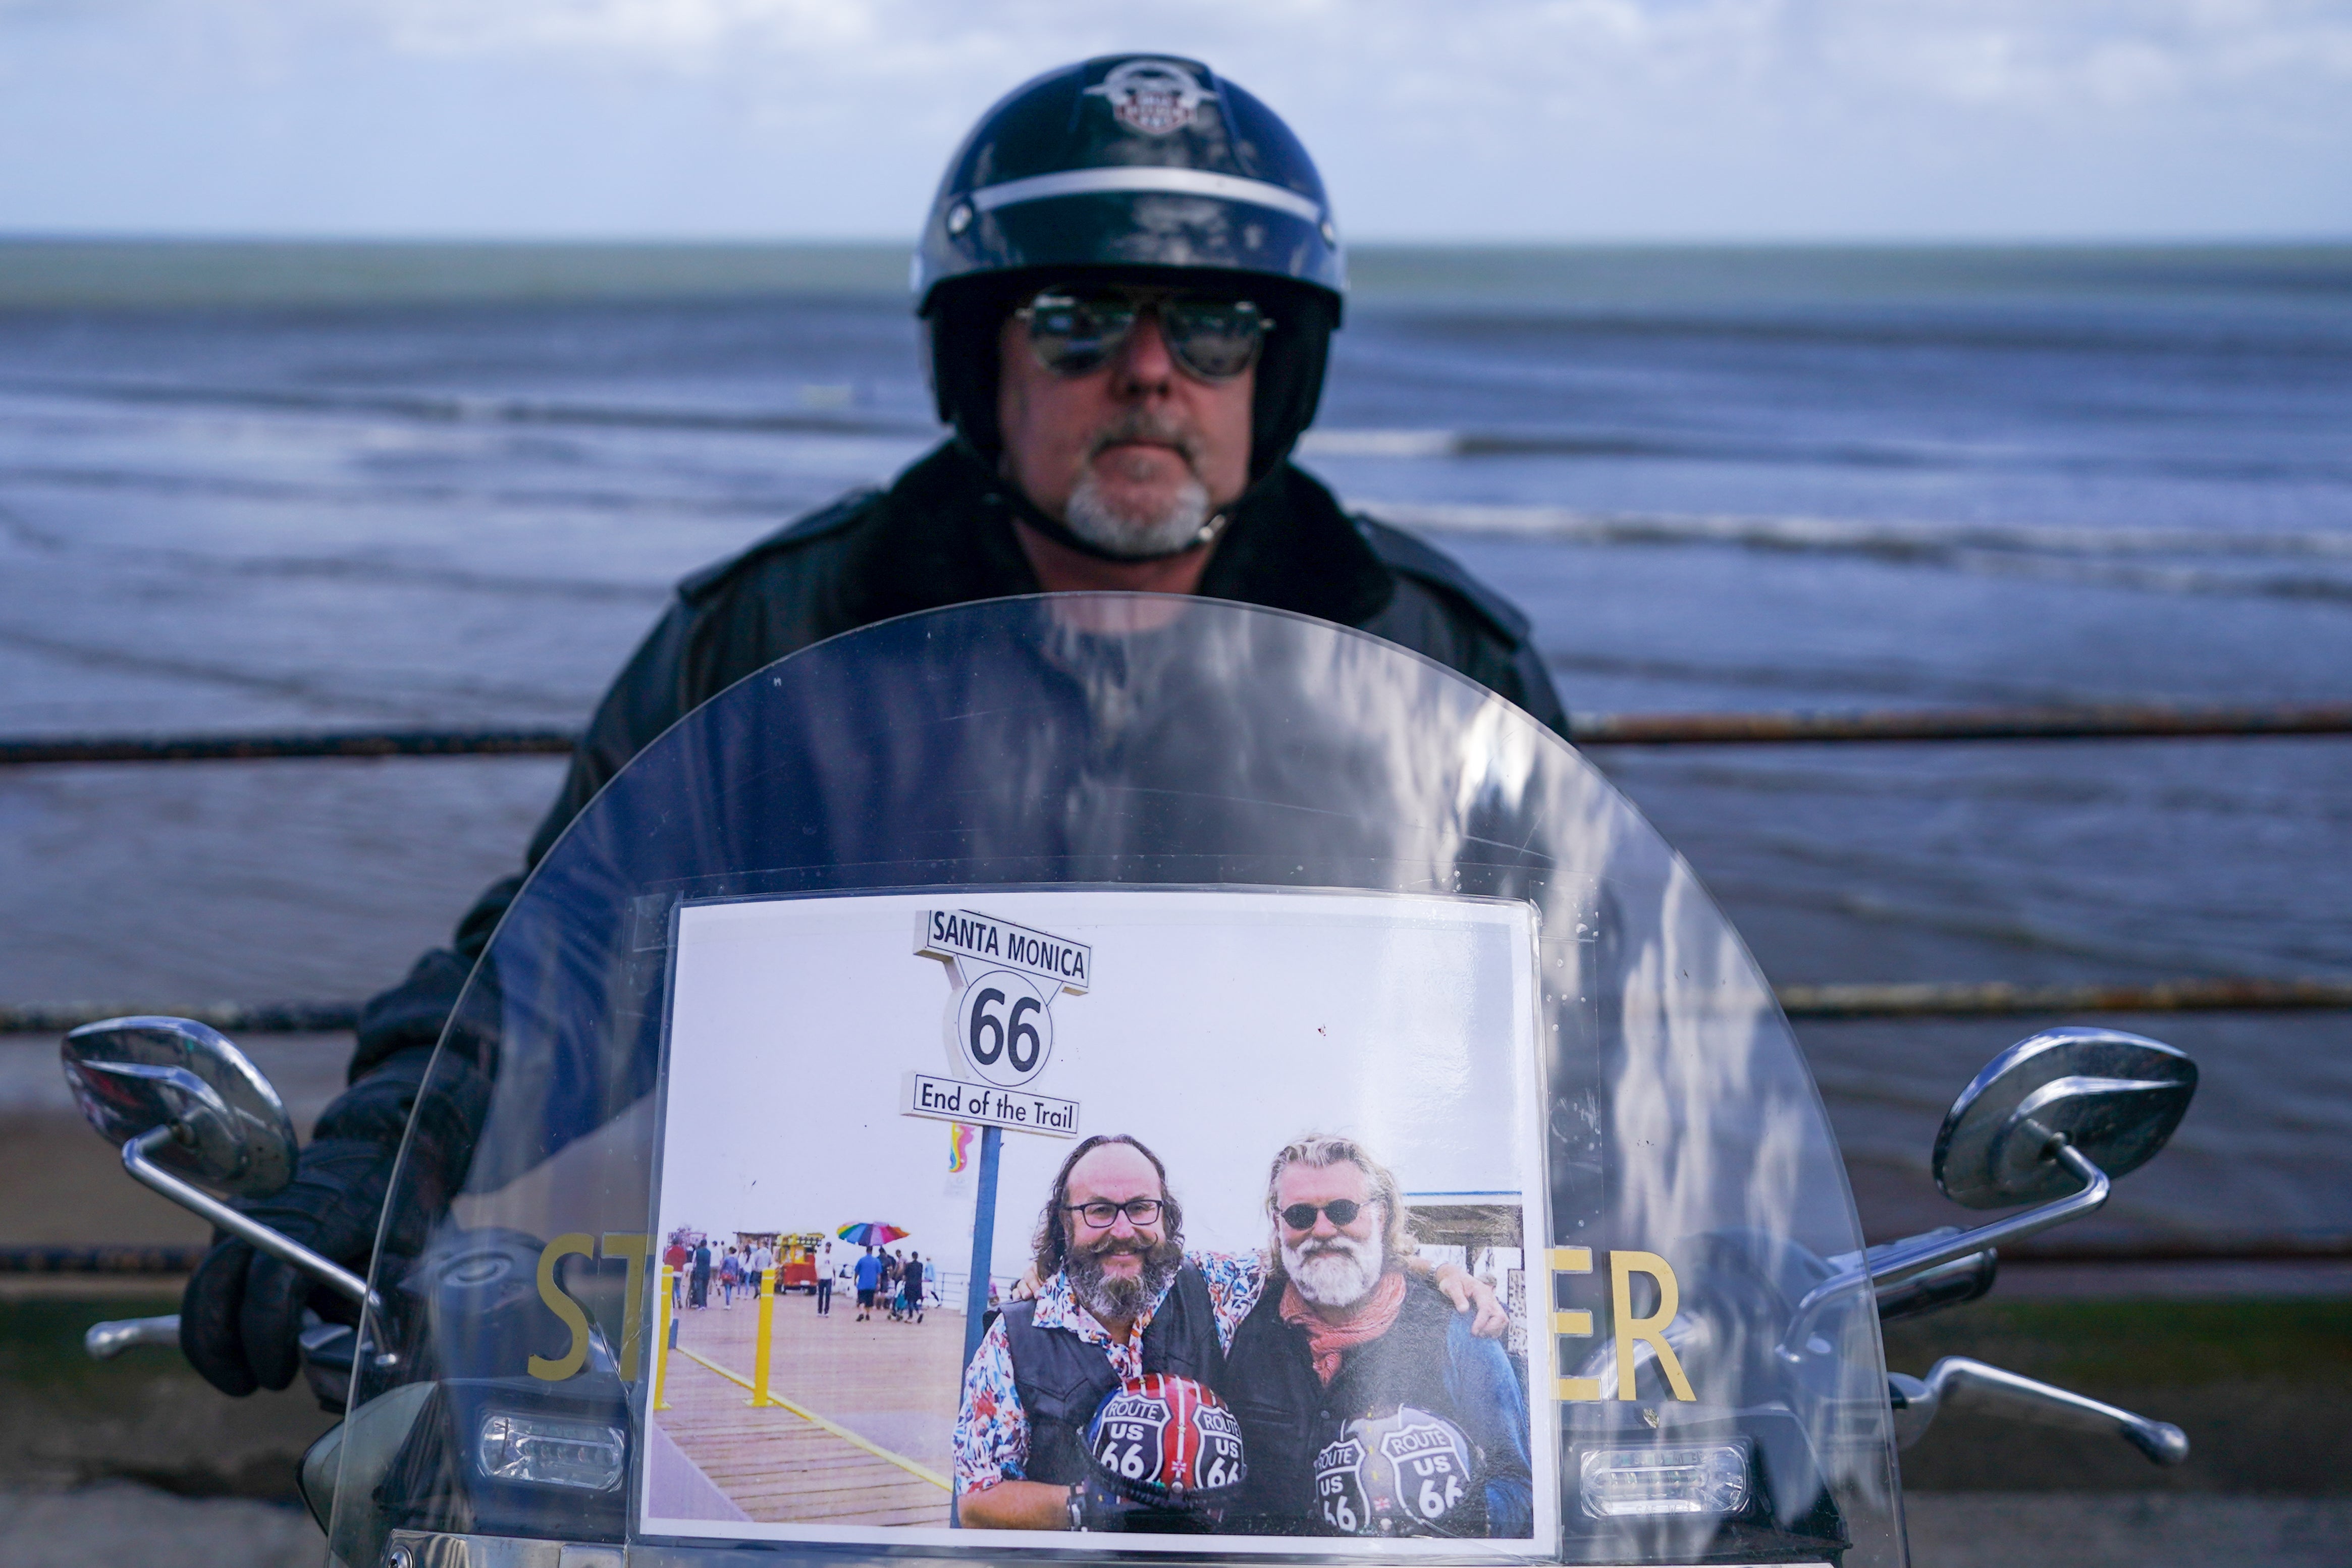 A biker parks his Harley Davidson motorcycle on the seafront as he arrives in Scarborough after completing a memorial bike ride for Dave Myers of the Hairy Bikers